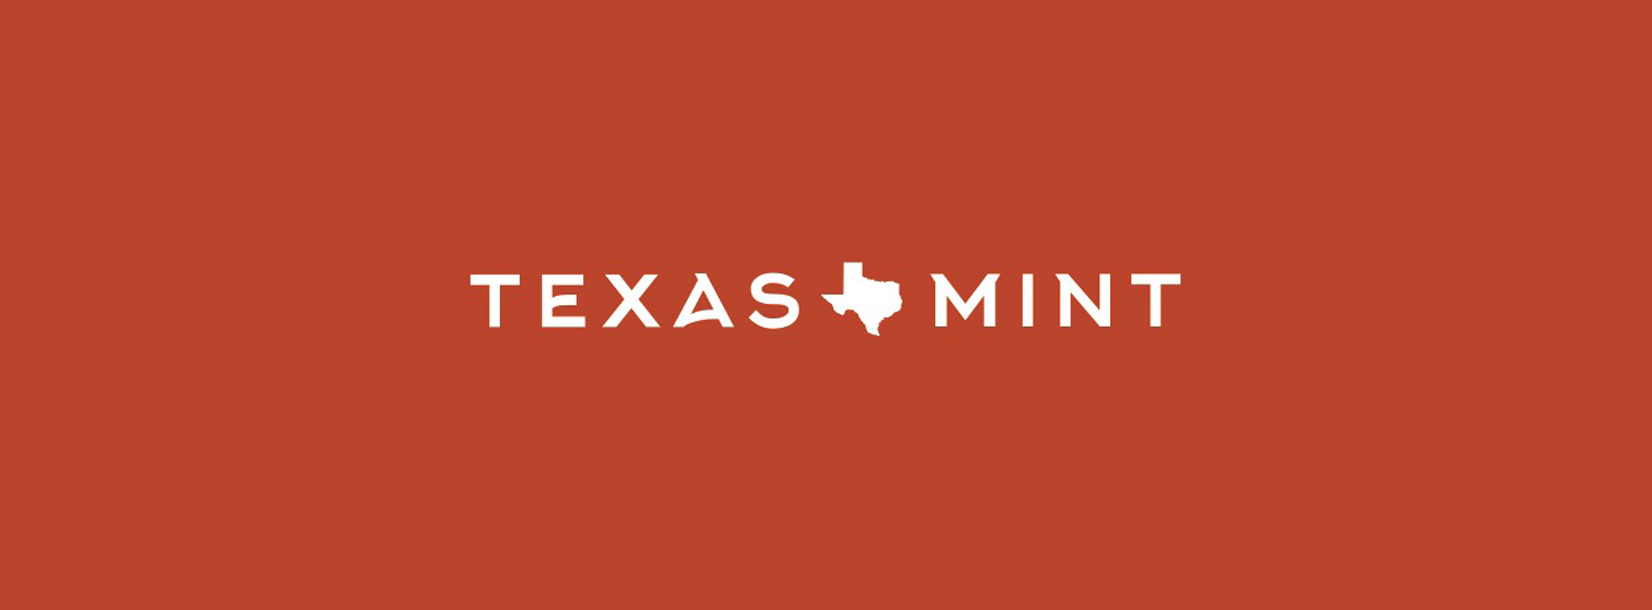 Texas Mint Announces Distribution Agreement with A-Mark Precious Metals